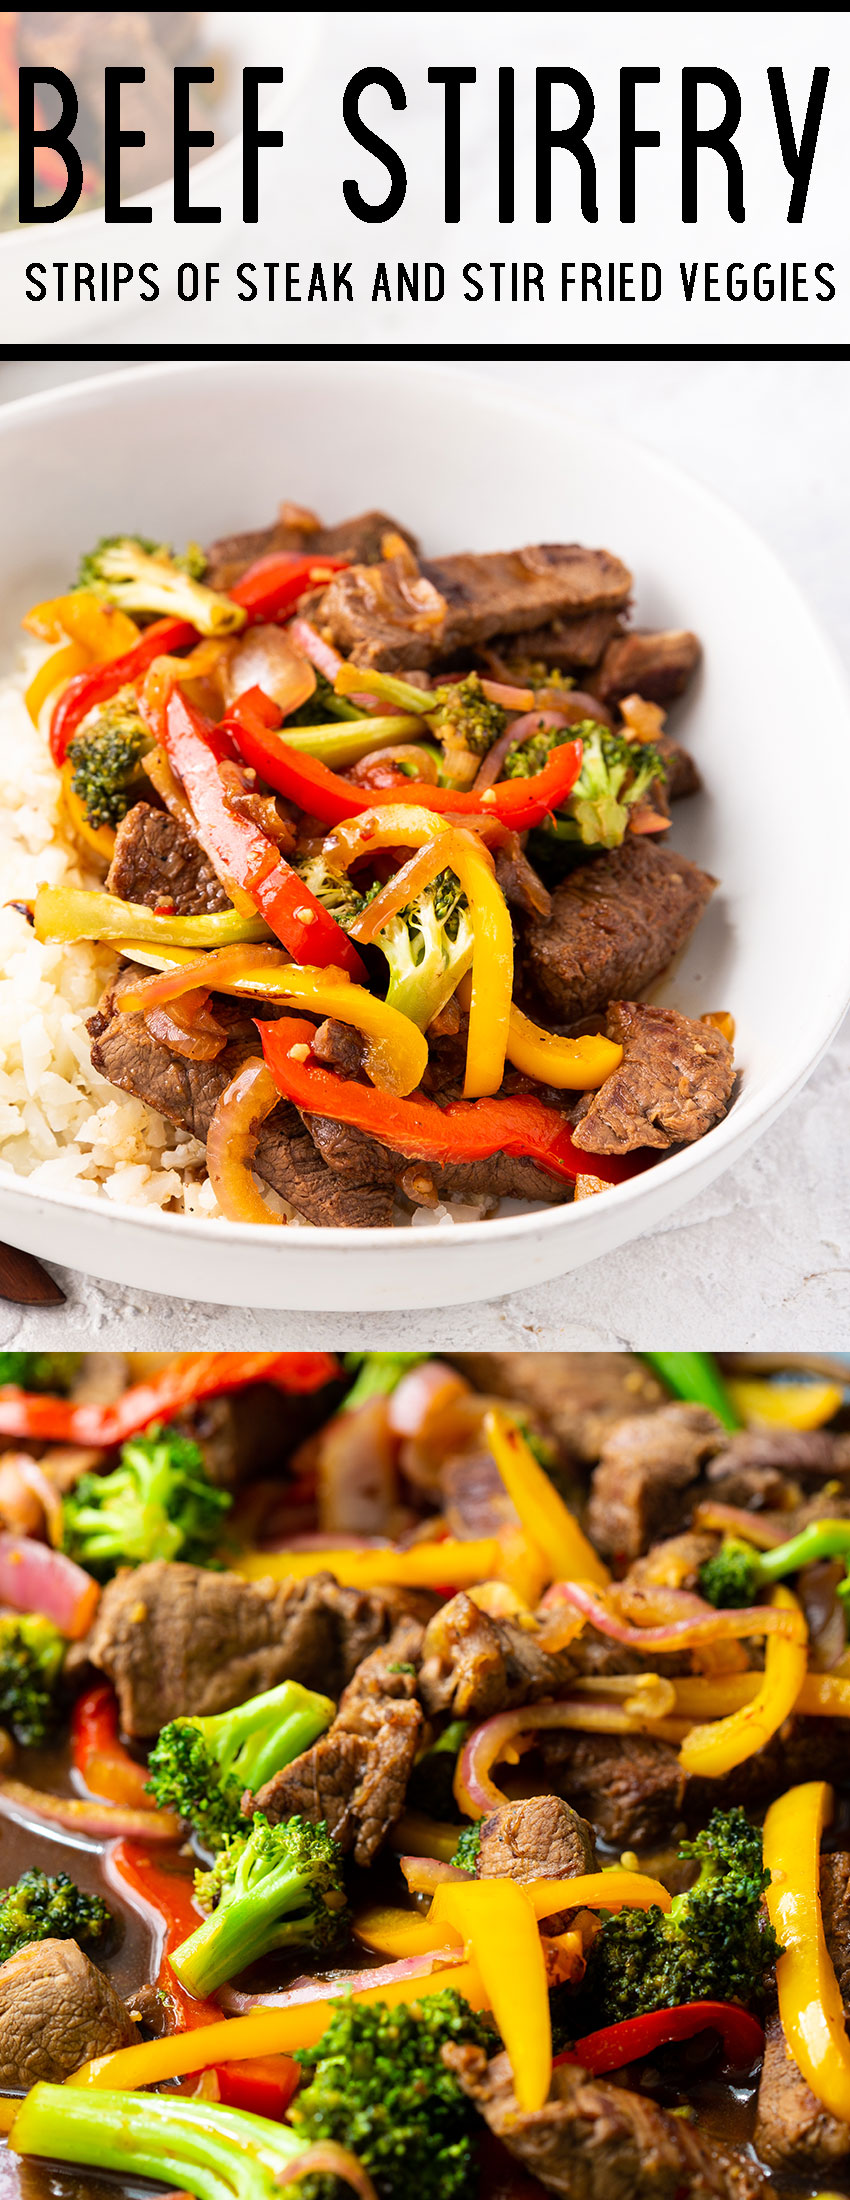 Beef stir fry in a skillet and in a white bowl